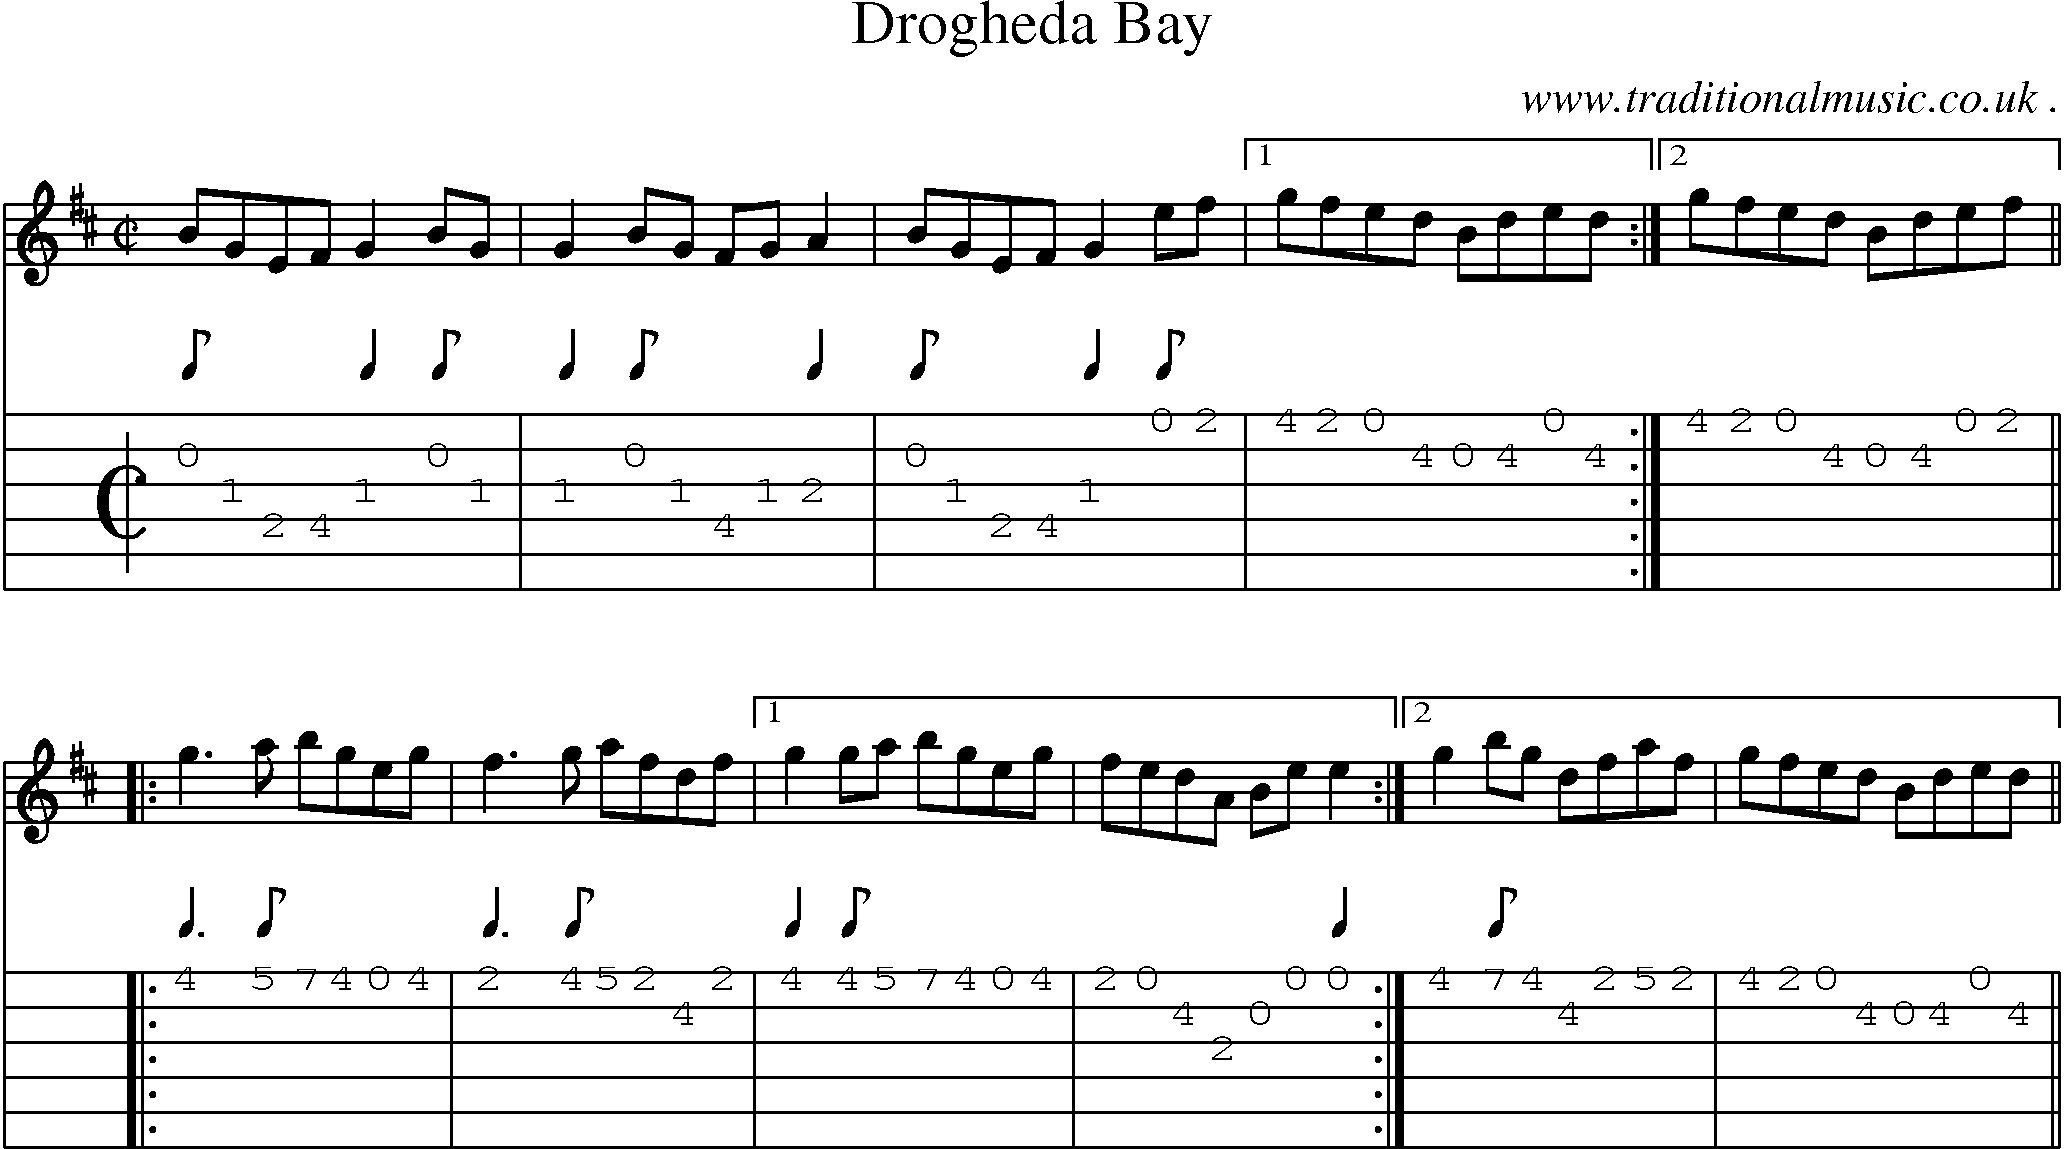 Sheet-Music and Guitar Tabs for Drogheda Bay